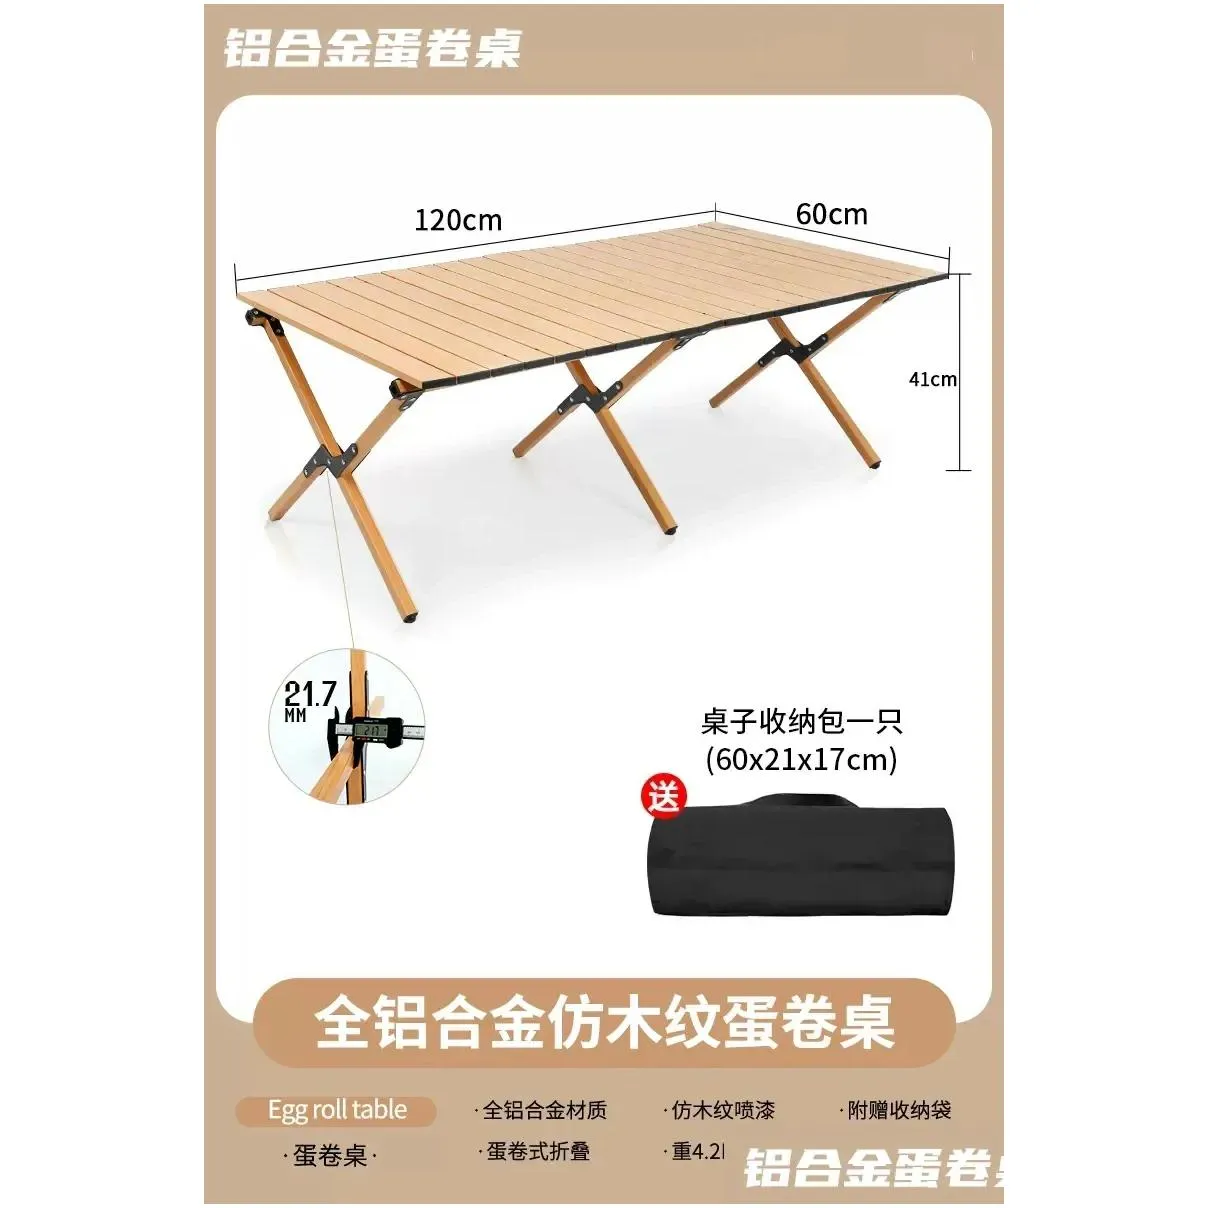 Camp Furniture Aluminum Alloy Chicken Rolls Table Camping Portable Picnic Chairs Equipment Outdoor Folding